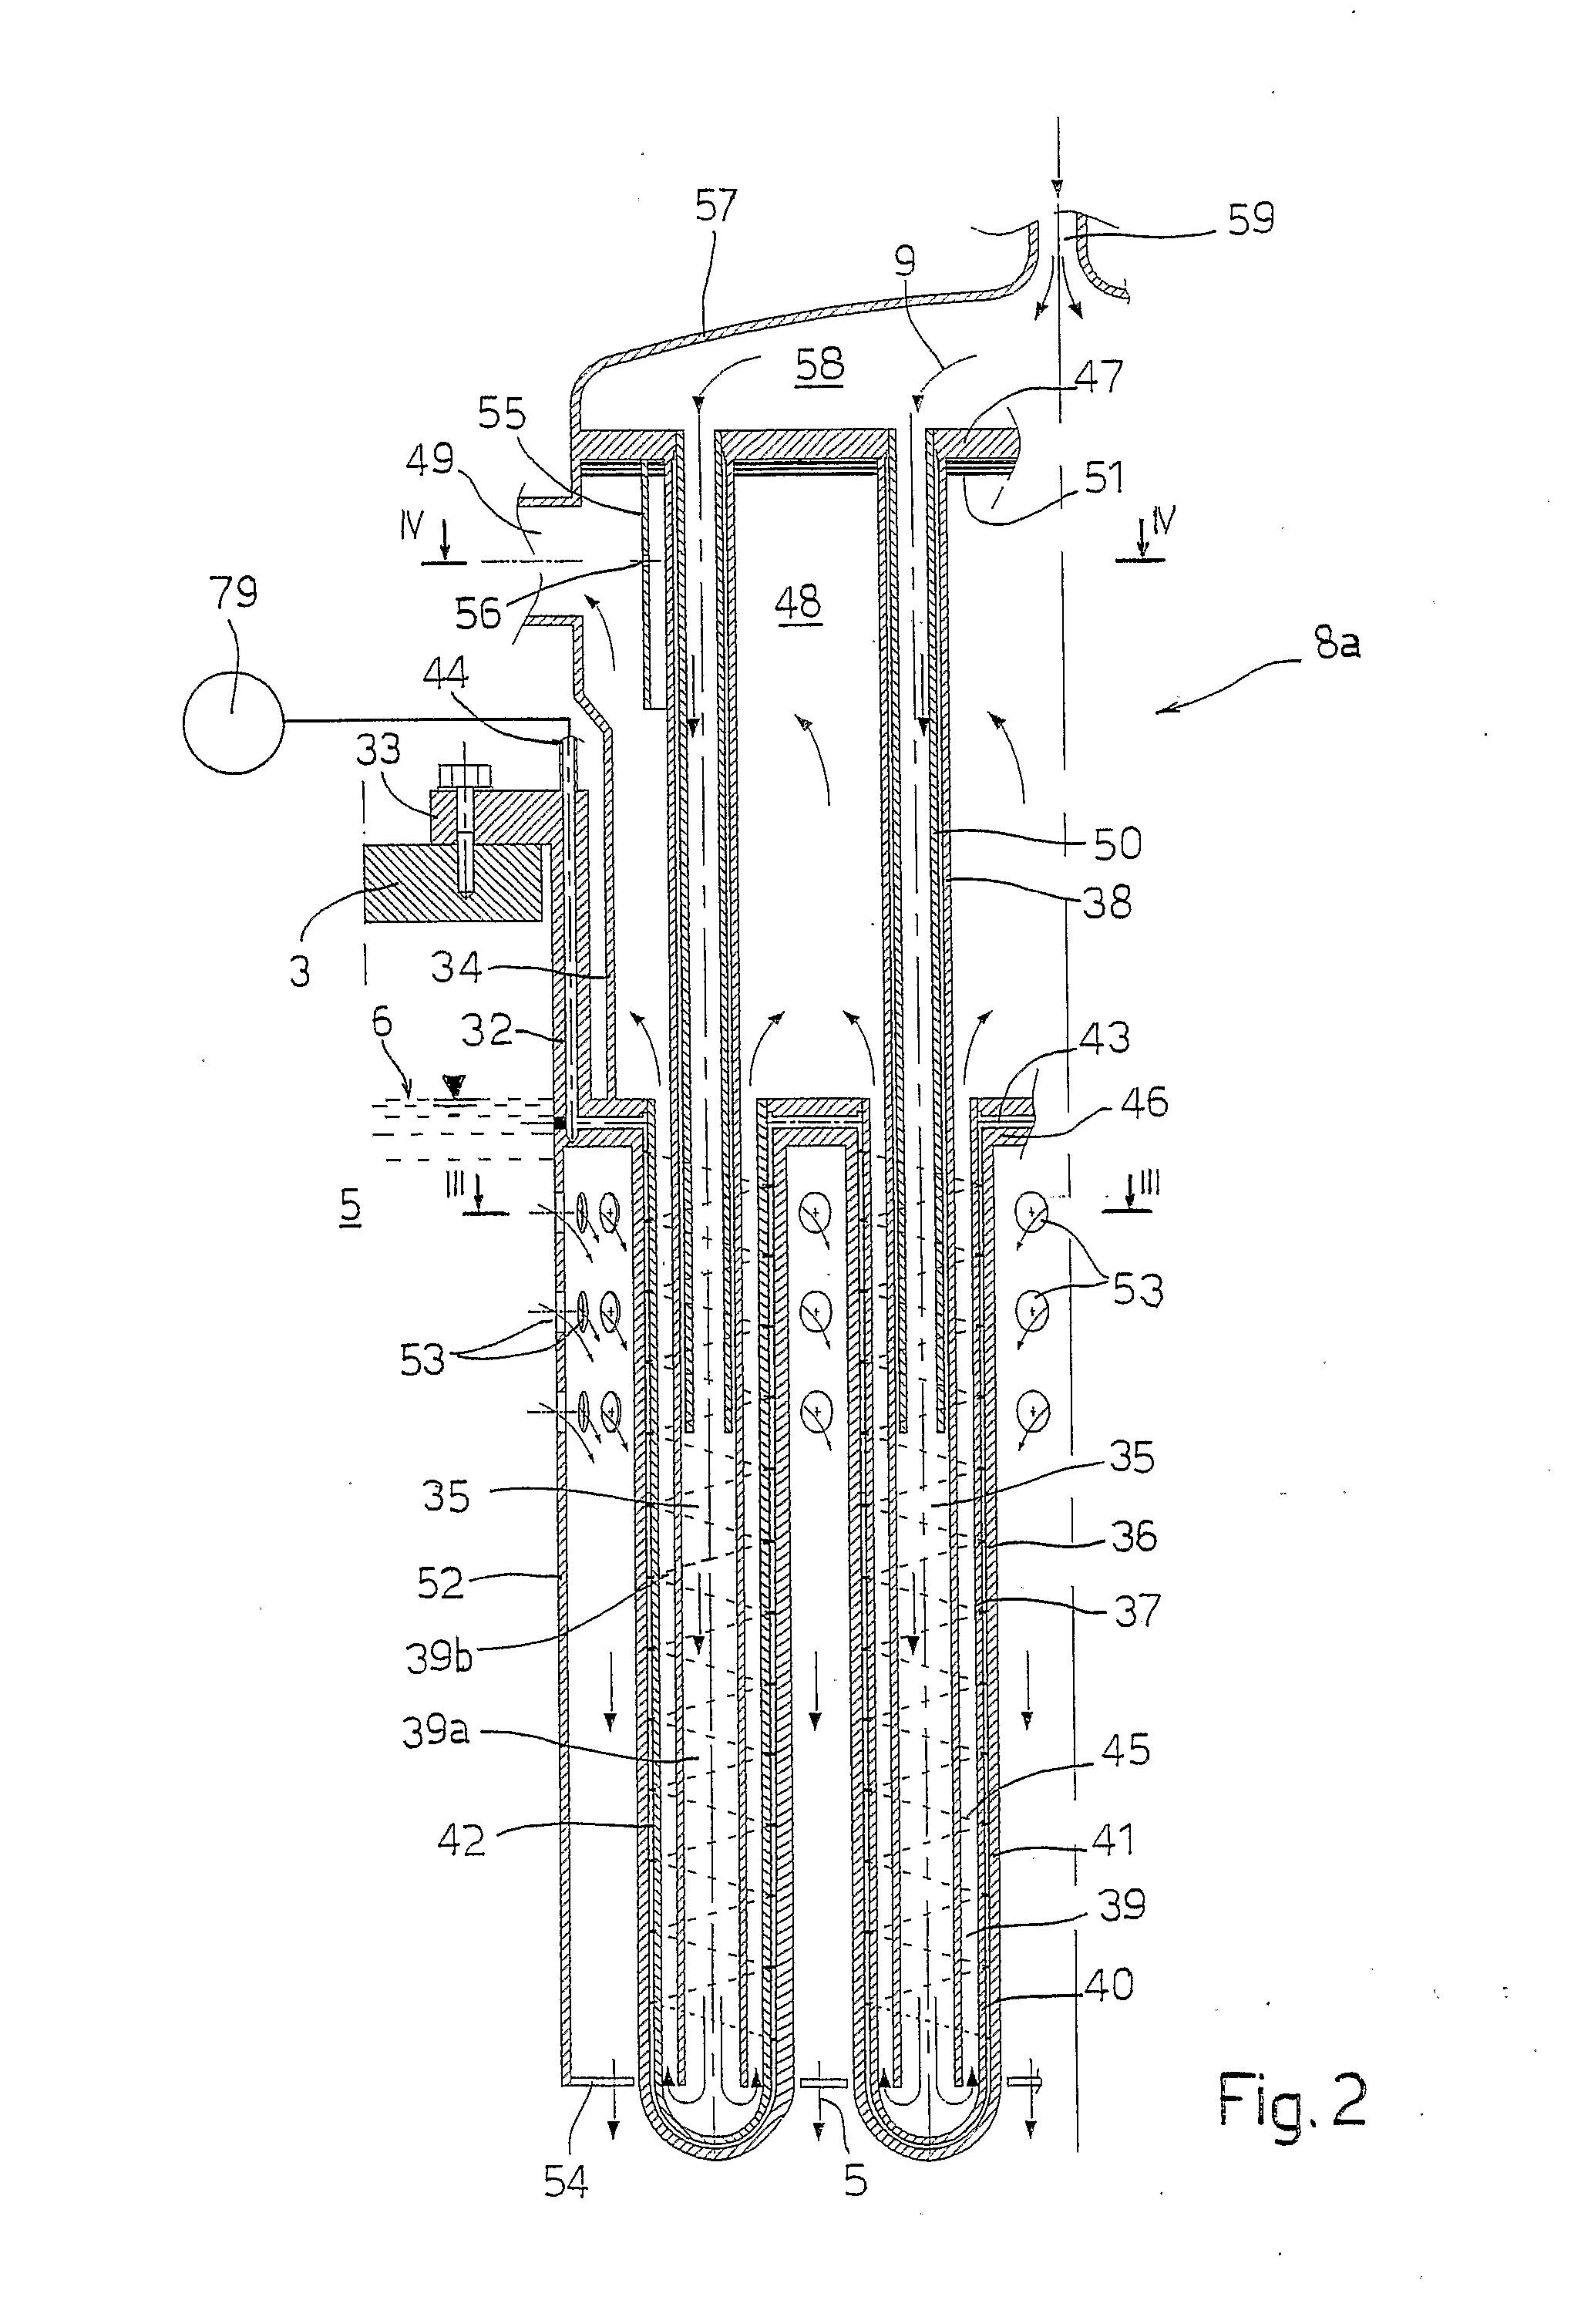 System for evacuating the residual heat from a liquid metal or molten salts cooled nuclear reactor